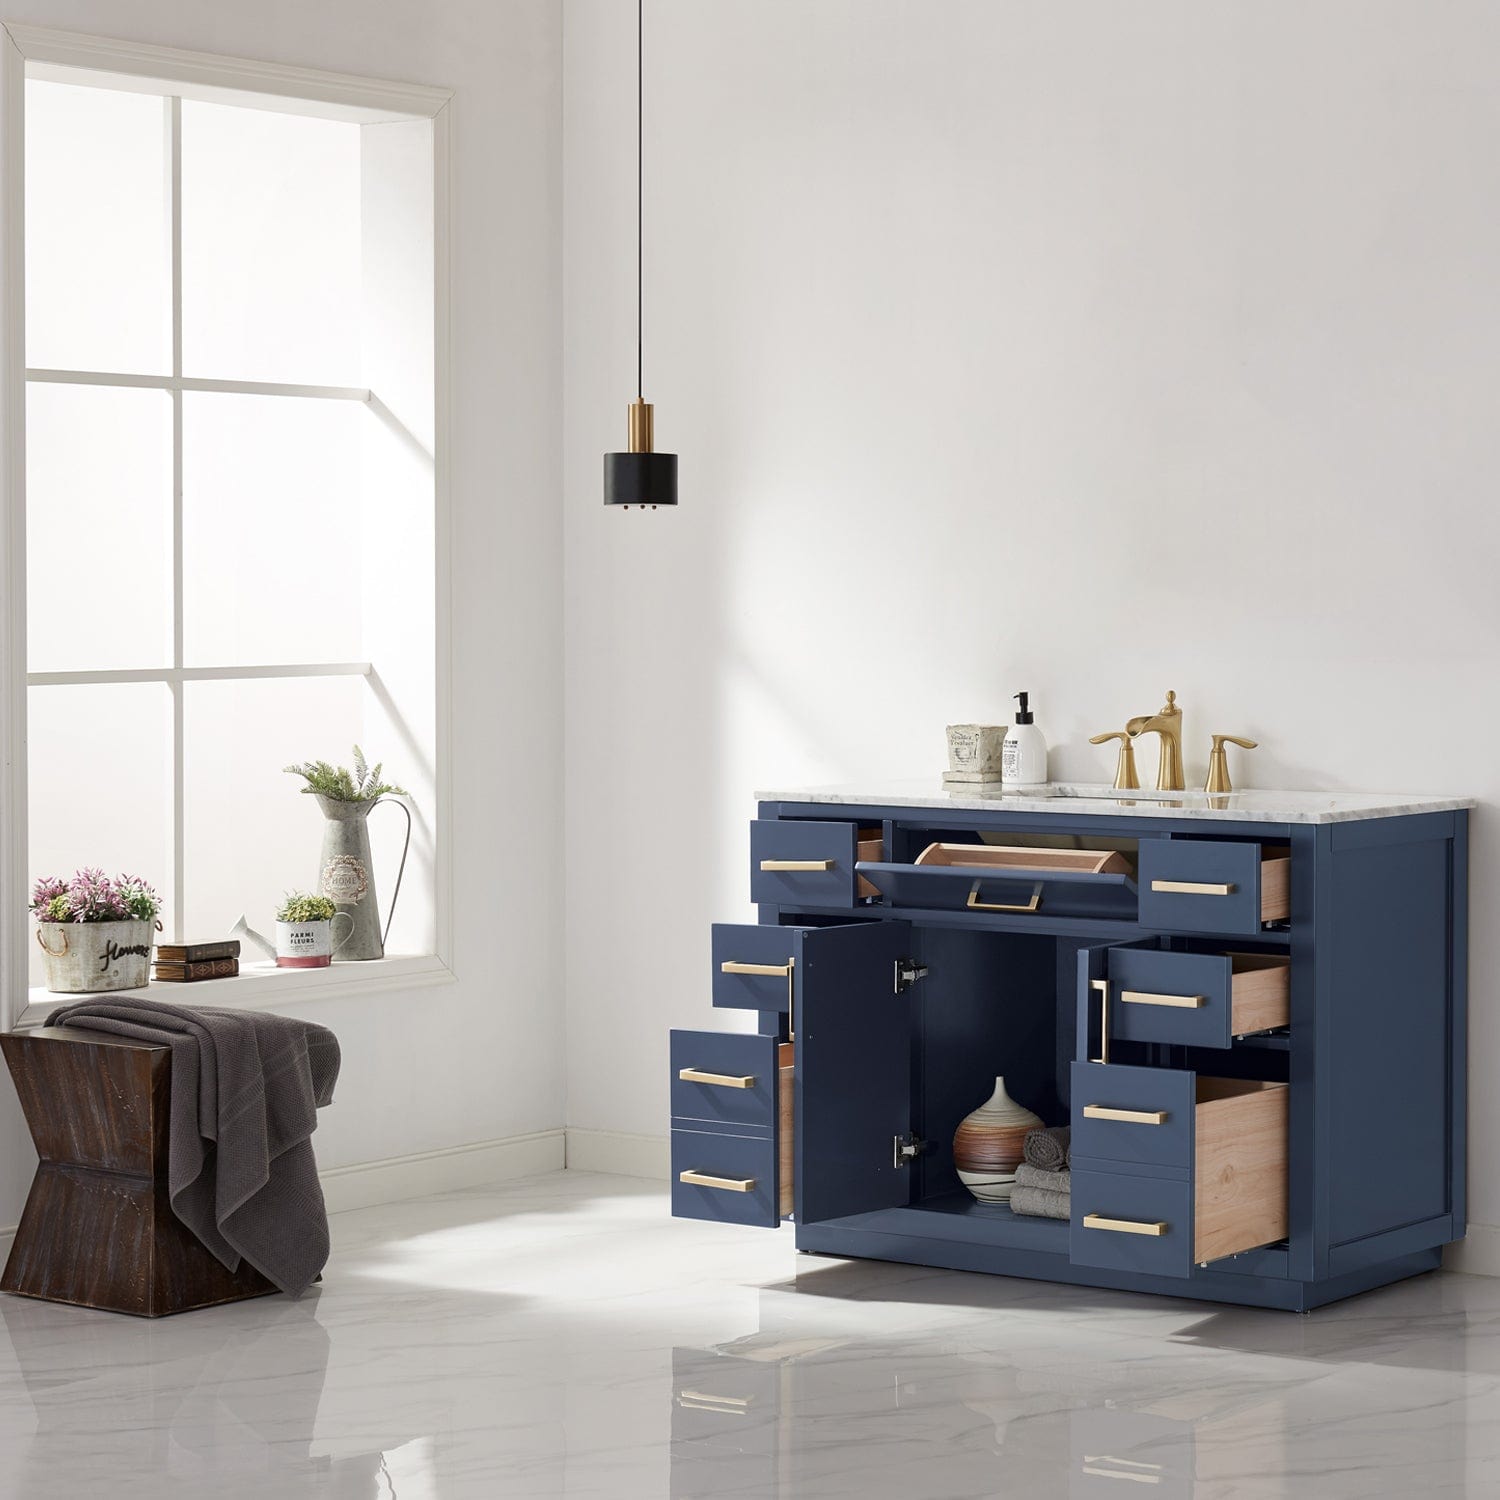 Altair Ivy 48" Single Bathroom Vanity Set in Royal Blue and Carrara White Marble Countertop without Mirror 531048-RB-CA-NM - Molaix631112971188Vanity531048-RB-CA-NM